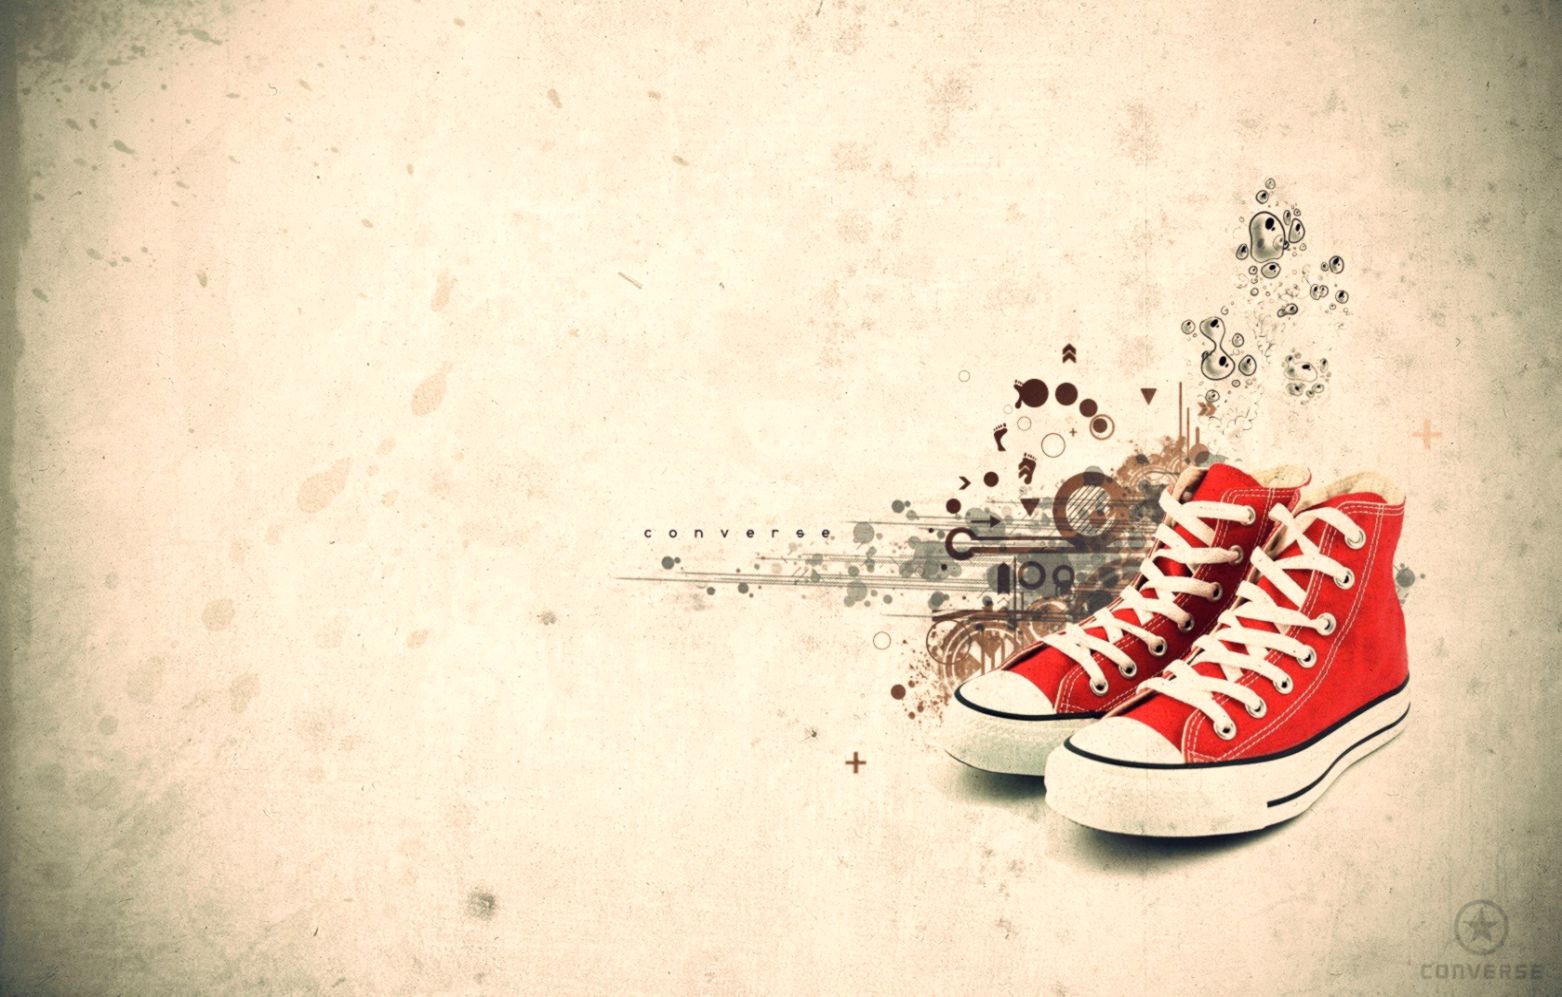 Converse Wallpaper For Iphone - Converse Shoes Background , HD Wallpaper & Backgrounds